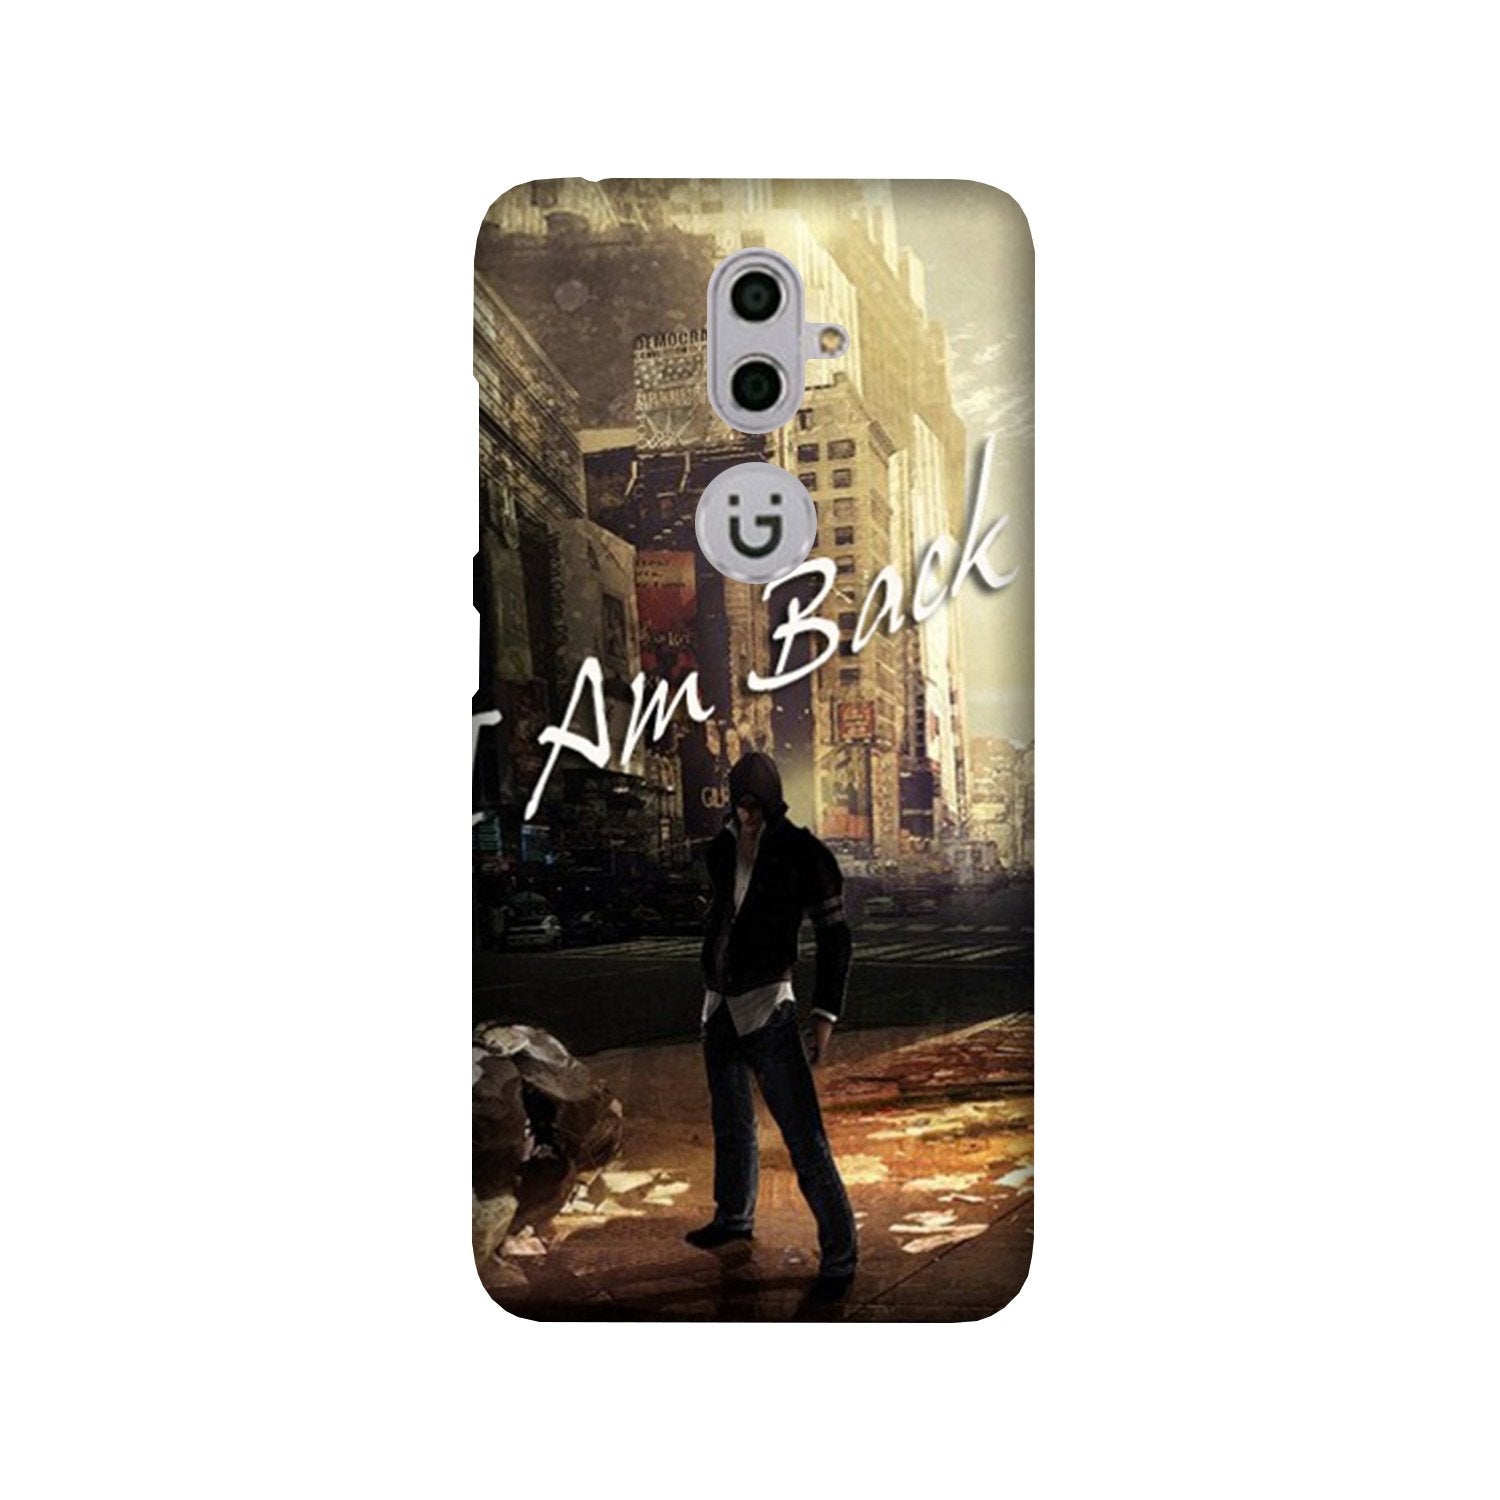 I am Back Case for Gionee S9 (Design No. 296)